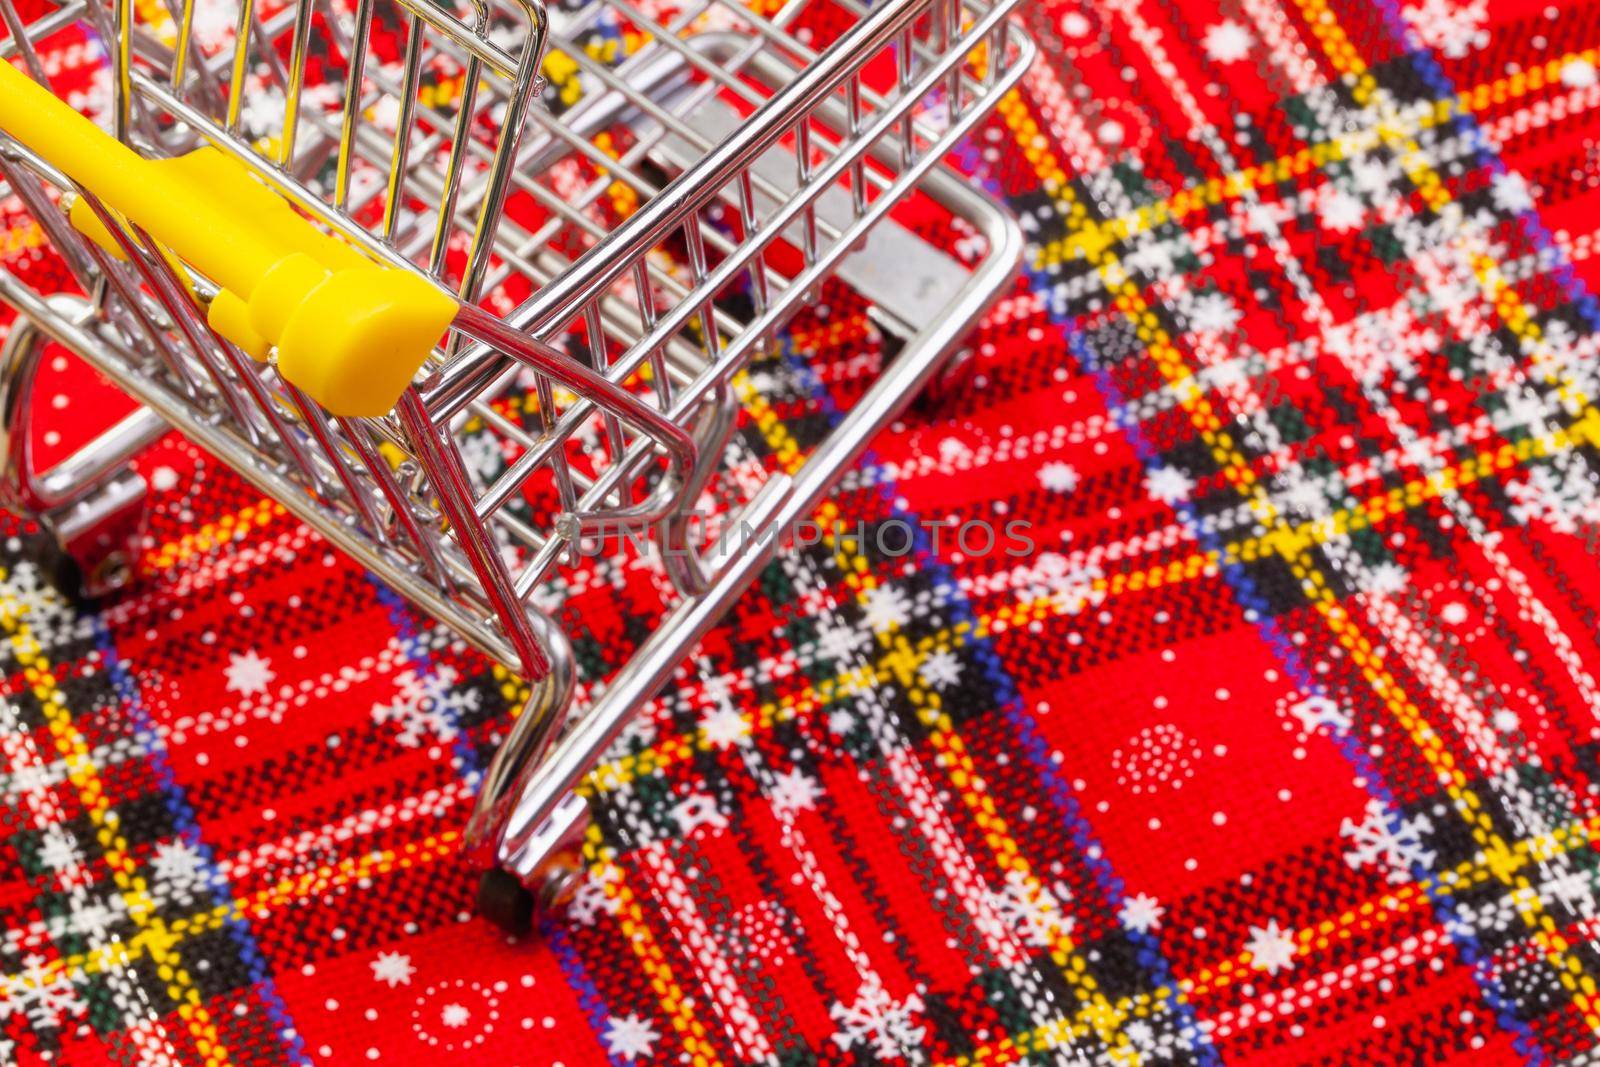 Shopping trolley and typical Christmas decoration. Winter holidays. Merry christmas and happy new year concept.